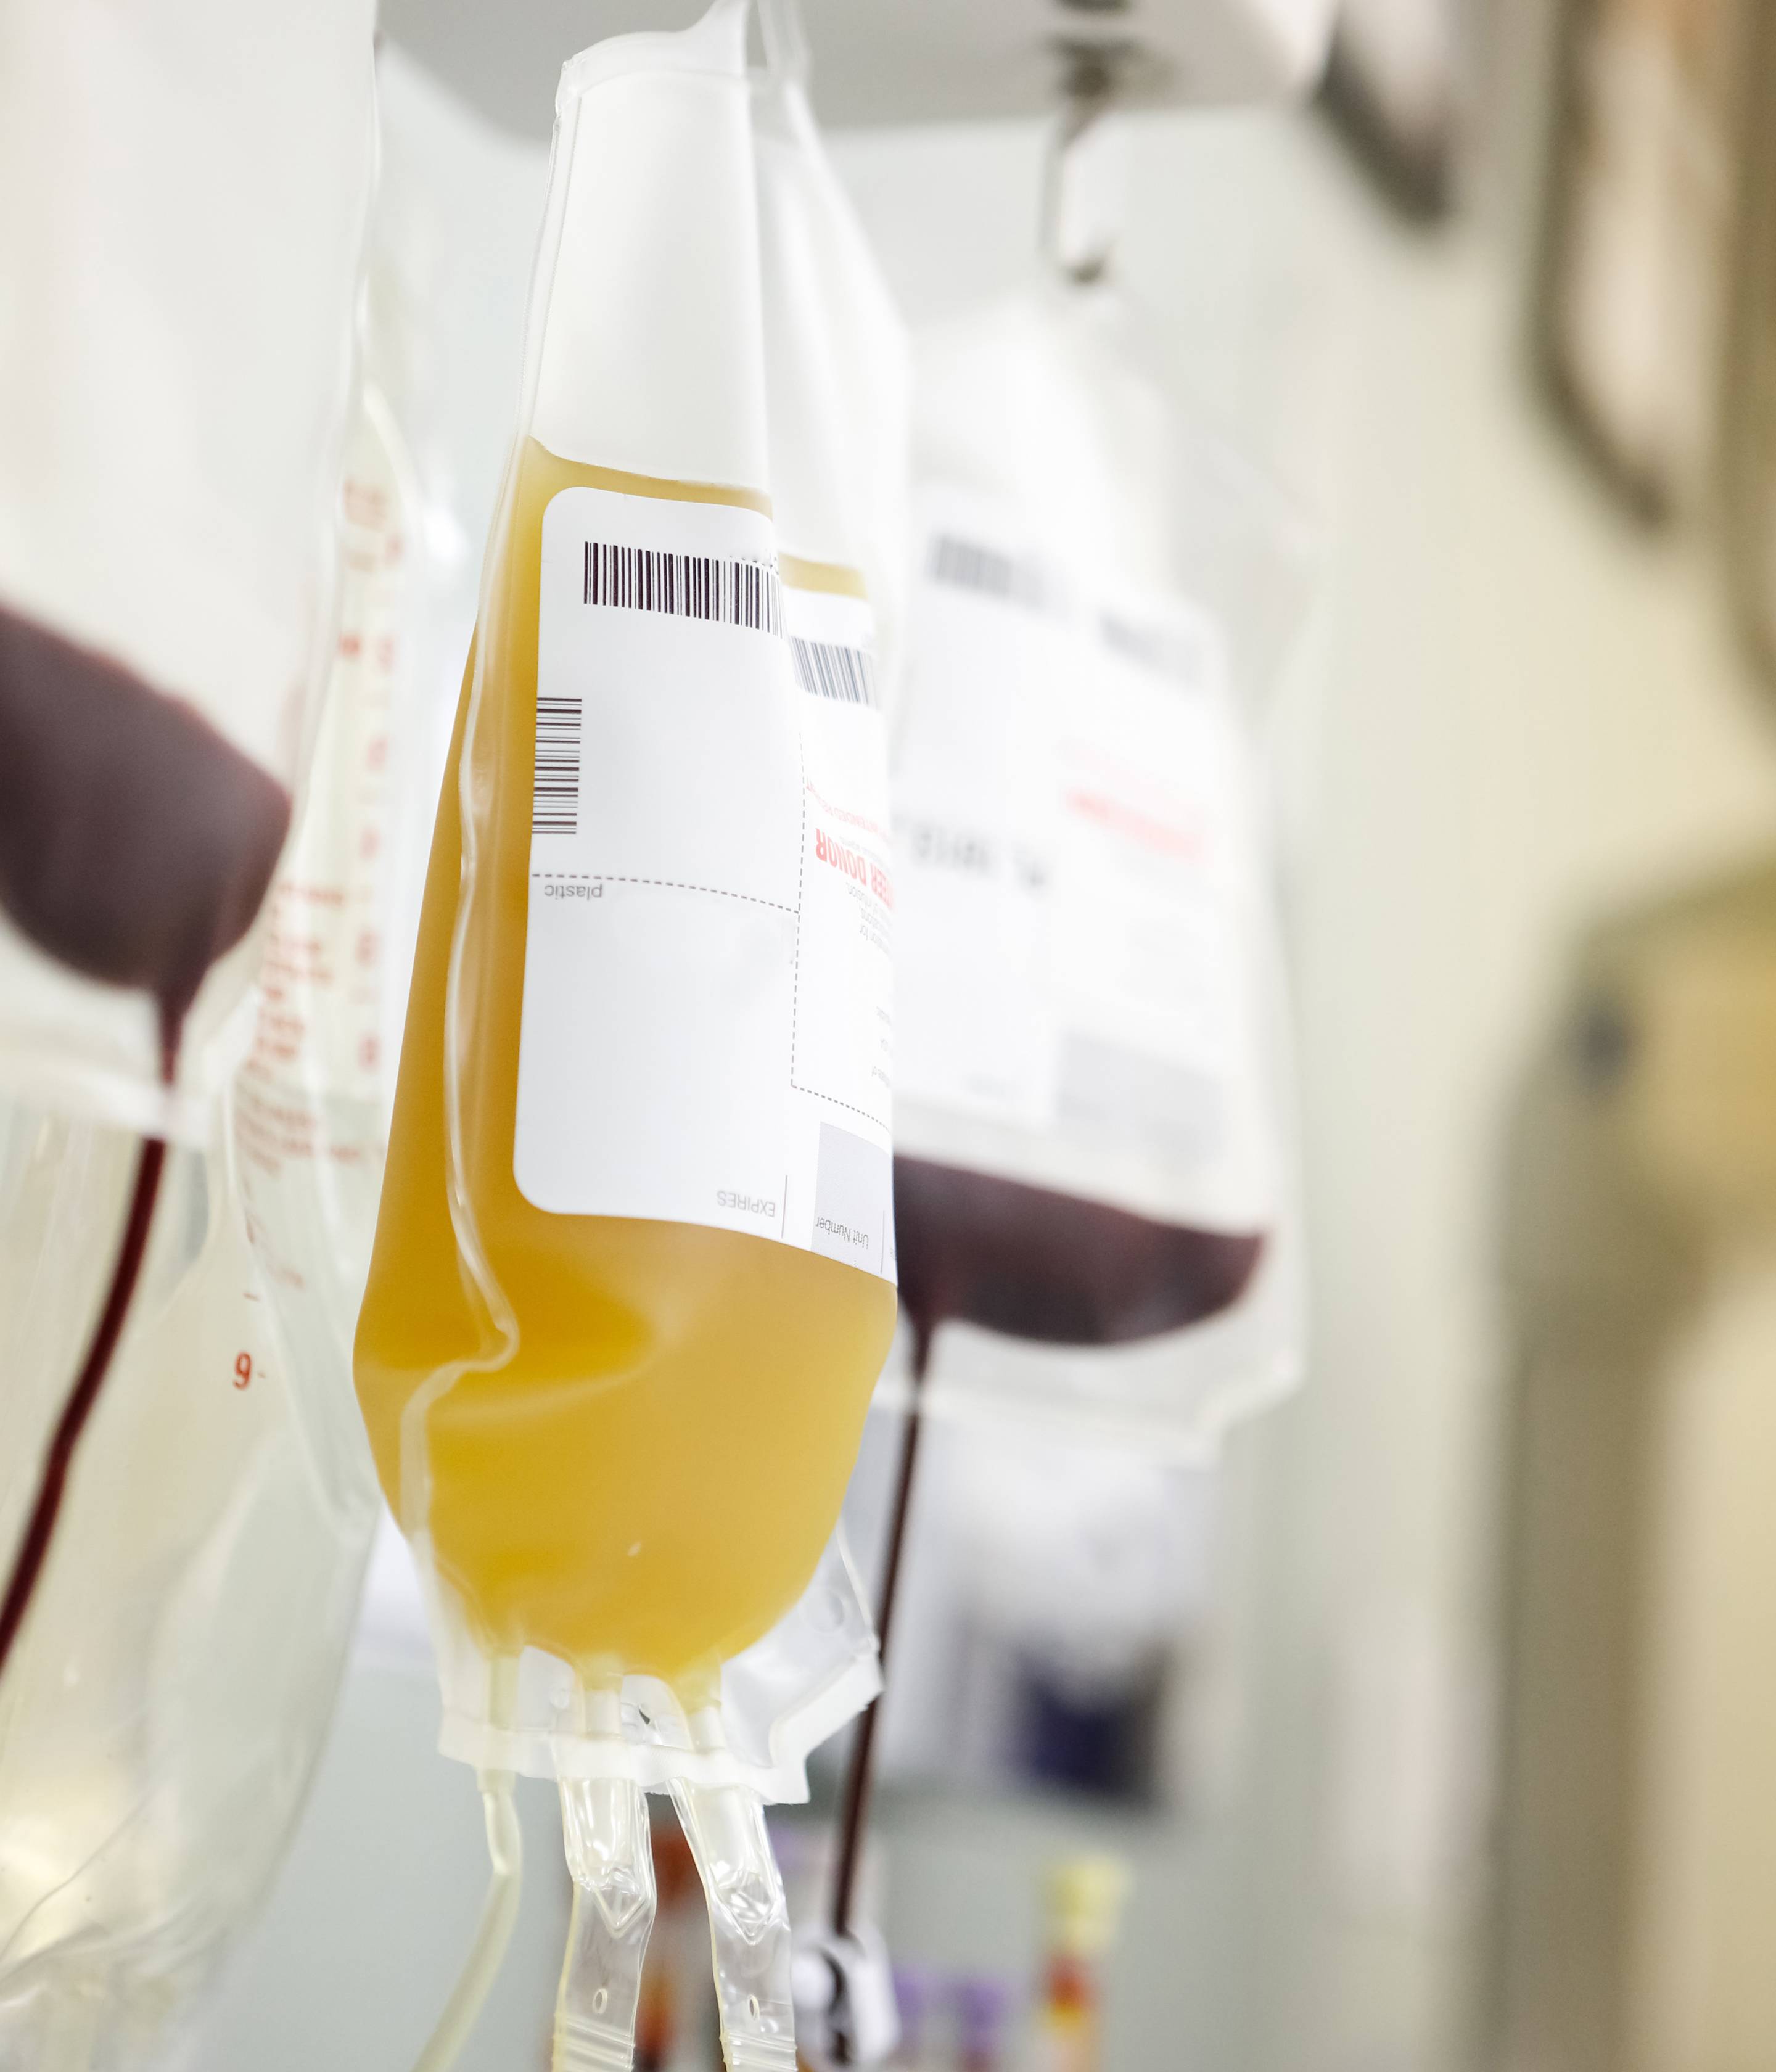 Patients who had more severe COVID-19 may be the best donors for convalescent plasma therapy